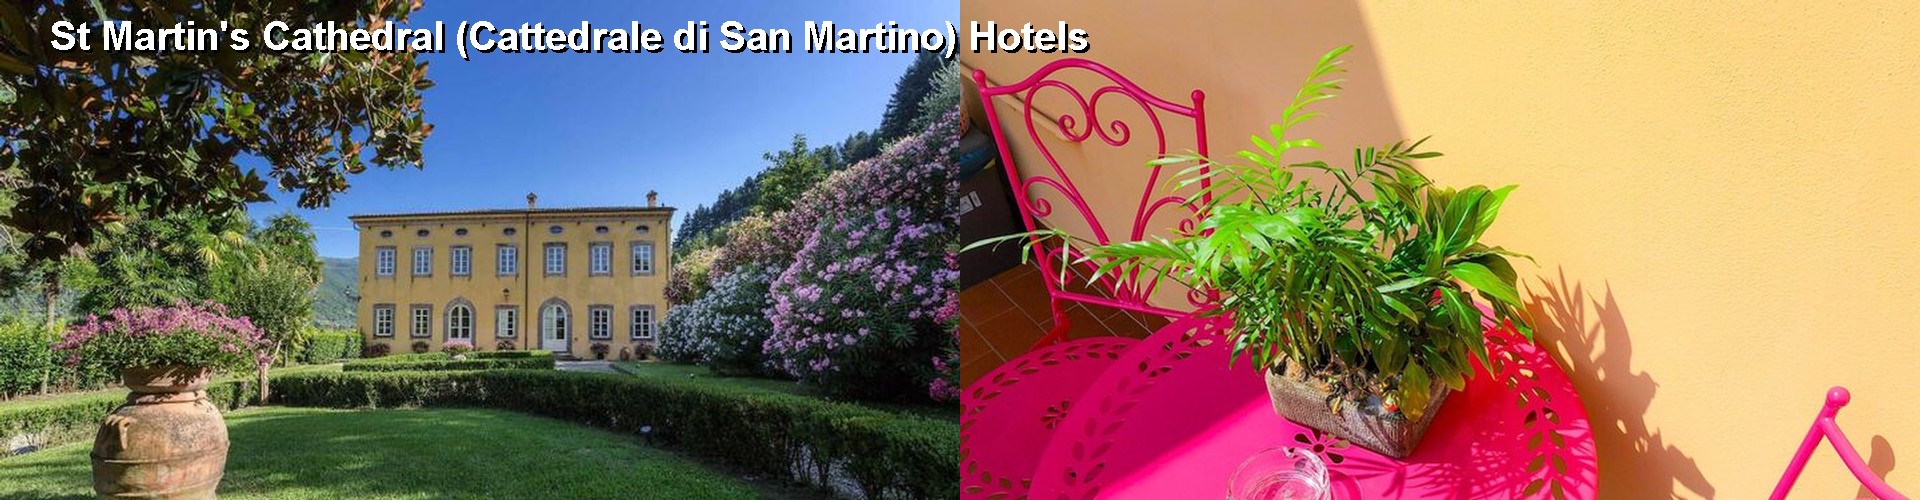 5 Best Hotels near St Martin's Cathedral (Cattedrale di San Martino)